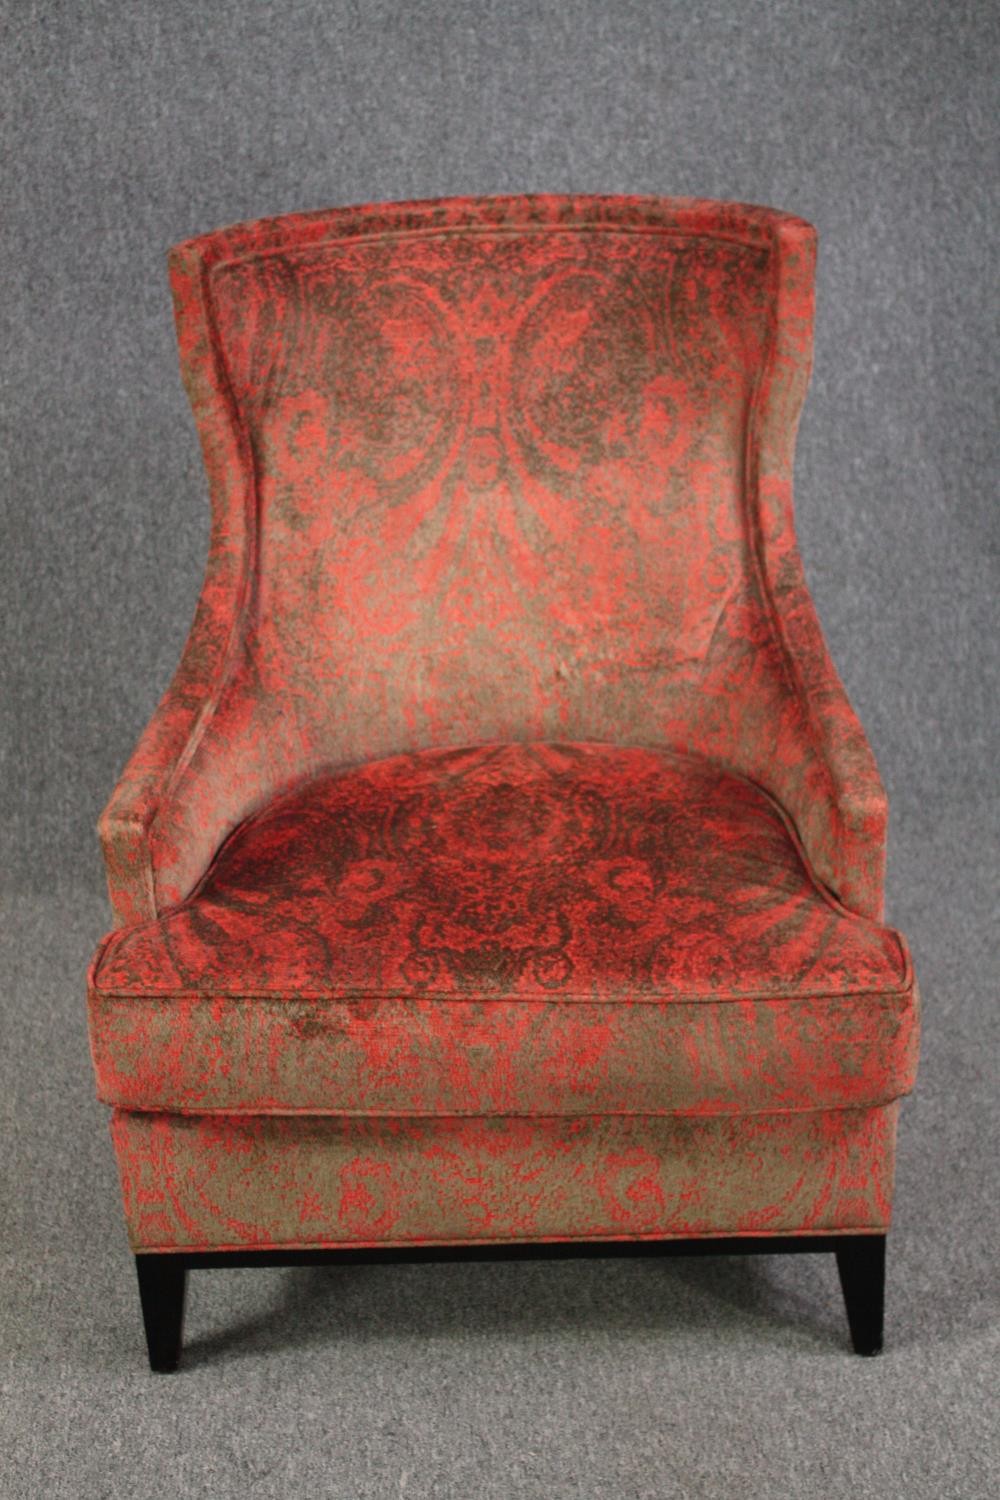 Armchairs, pair contemporary upholstered. H.100 W.176cm.(each) - Image 2 of 6